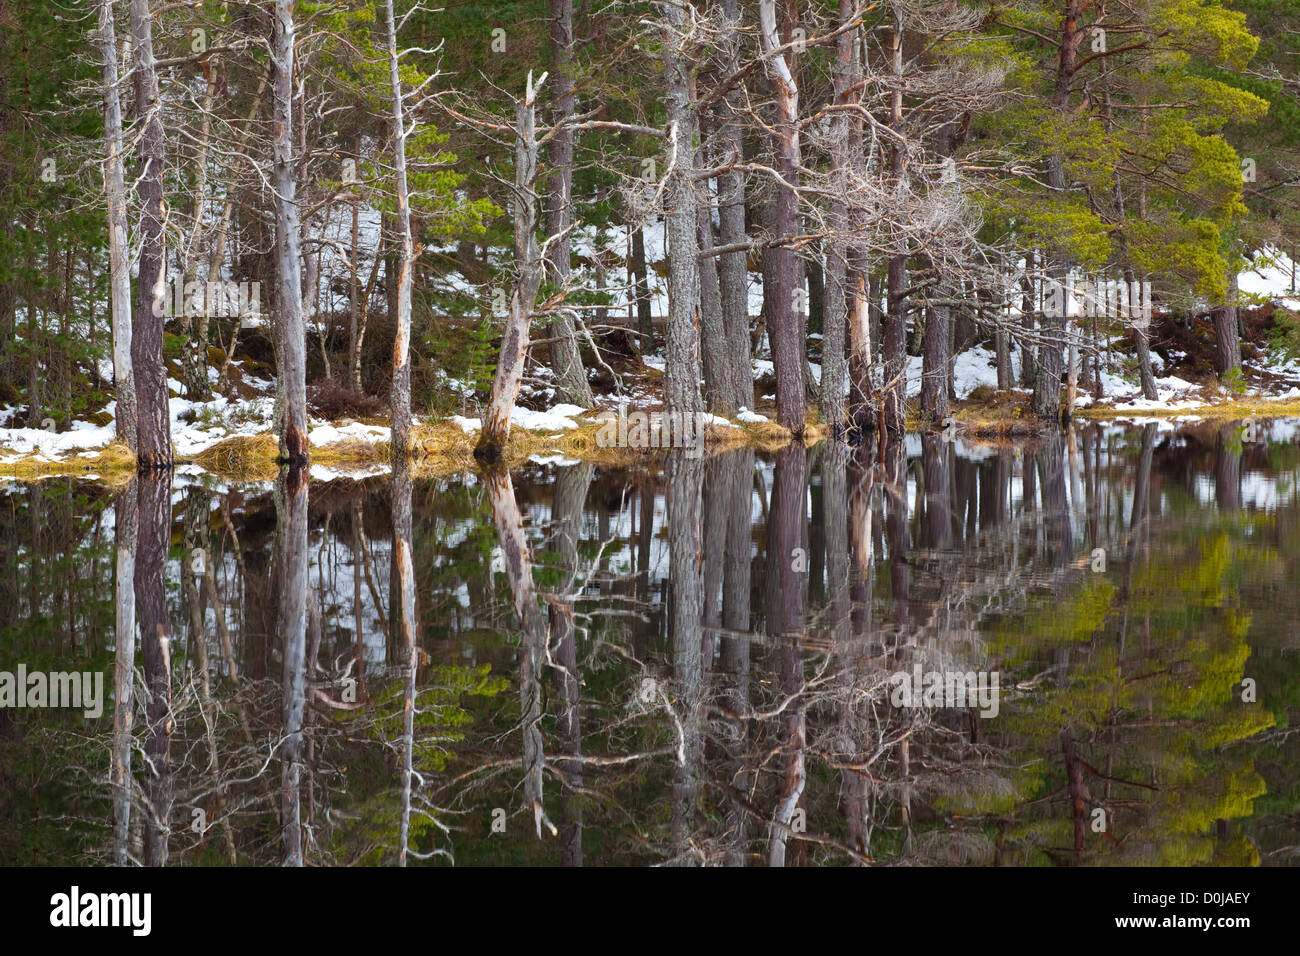 Native forest reflected upon the still loch waters of the Uath Lochans in Inshriach Forest. Stock Photo